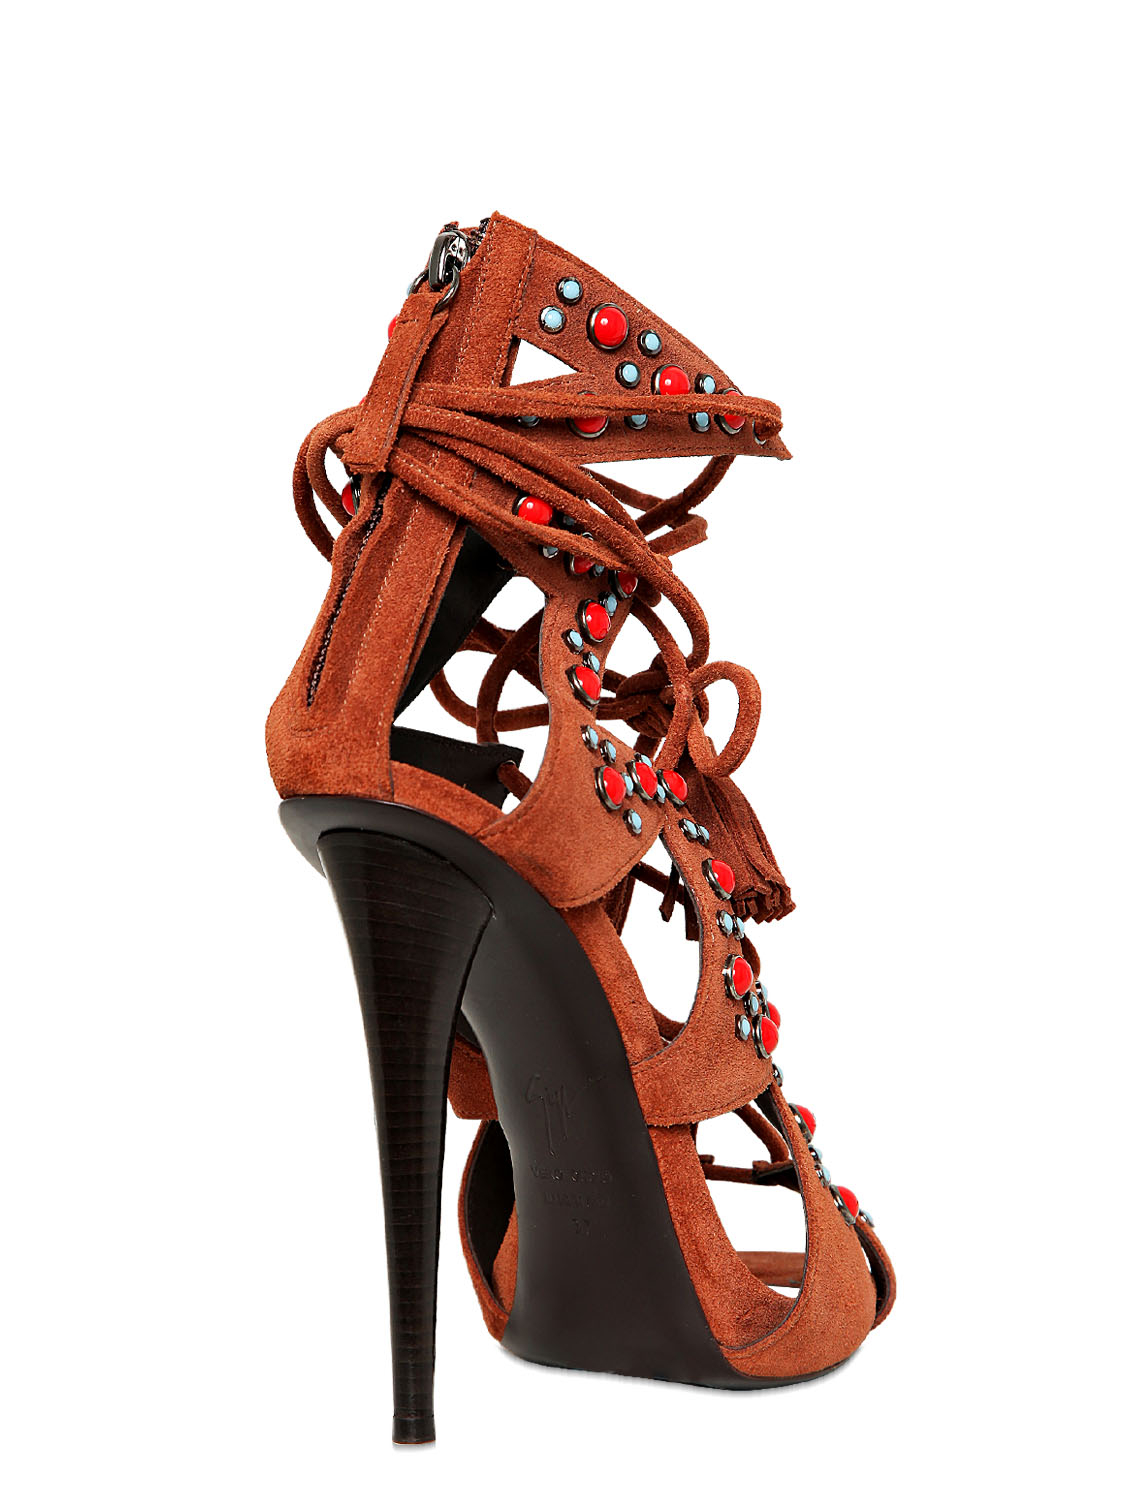 Lyst - Giuseppe zanotti 120mm Beaded Suede Sandals in Brown